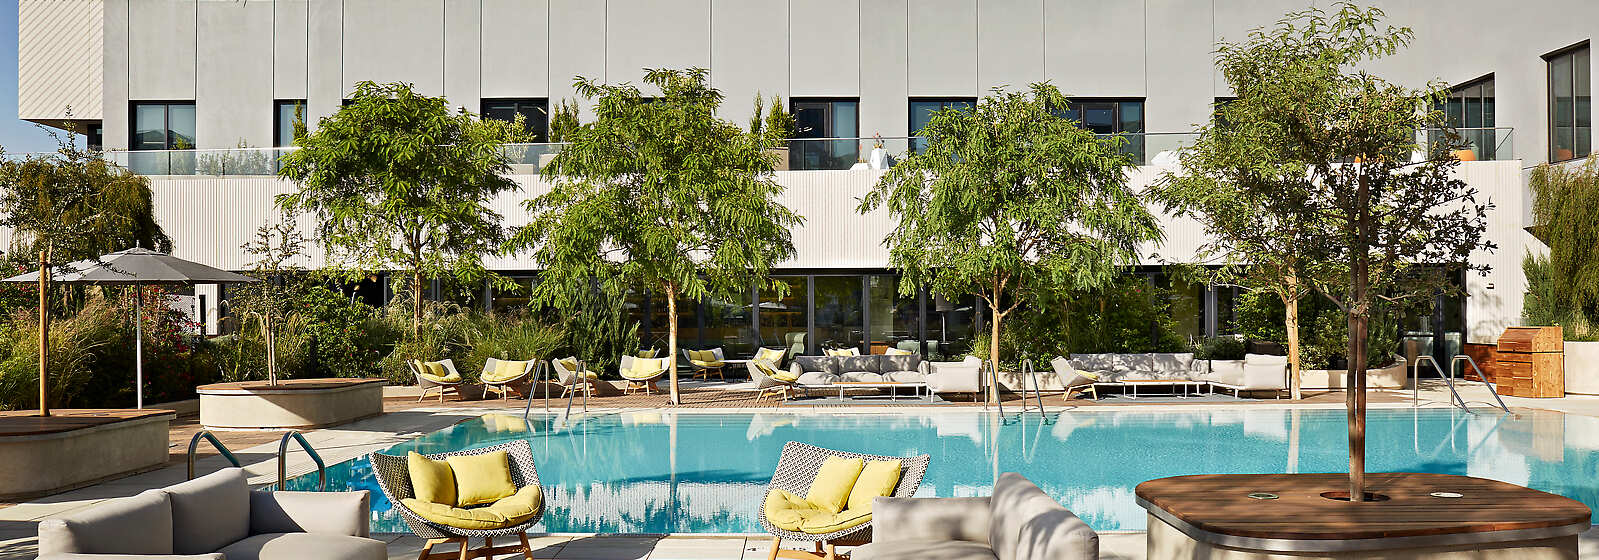 Third-floor pool deck with unrivaled views of Golden 1 Center.